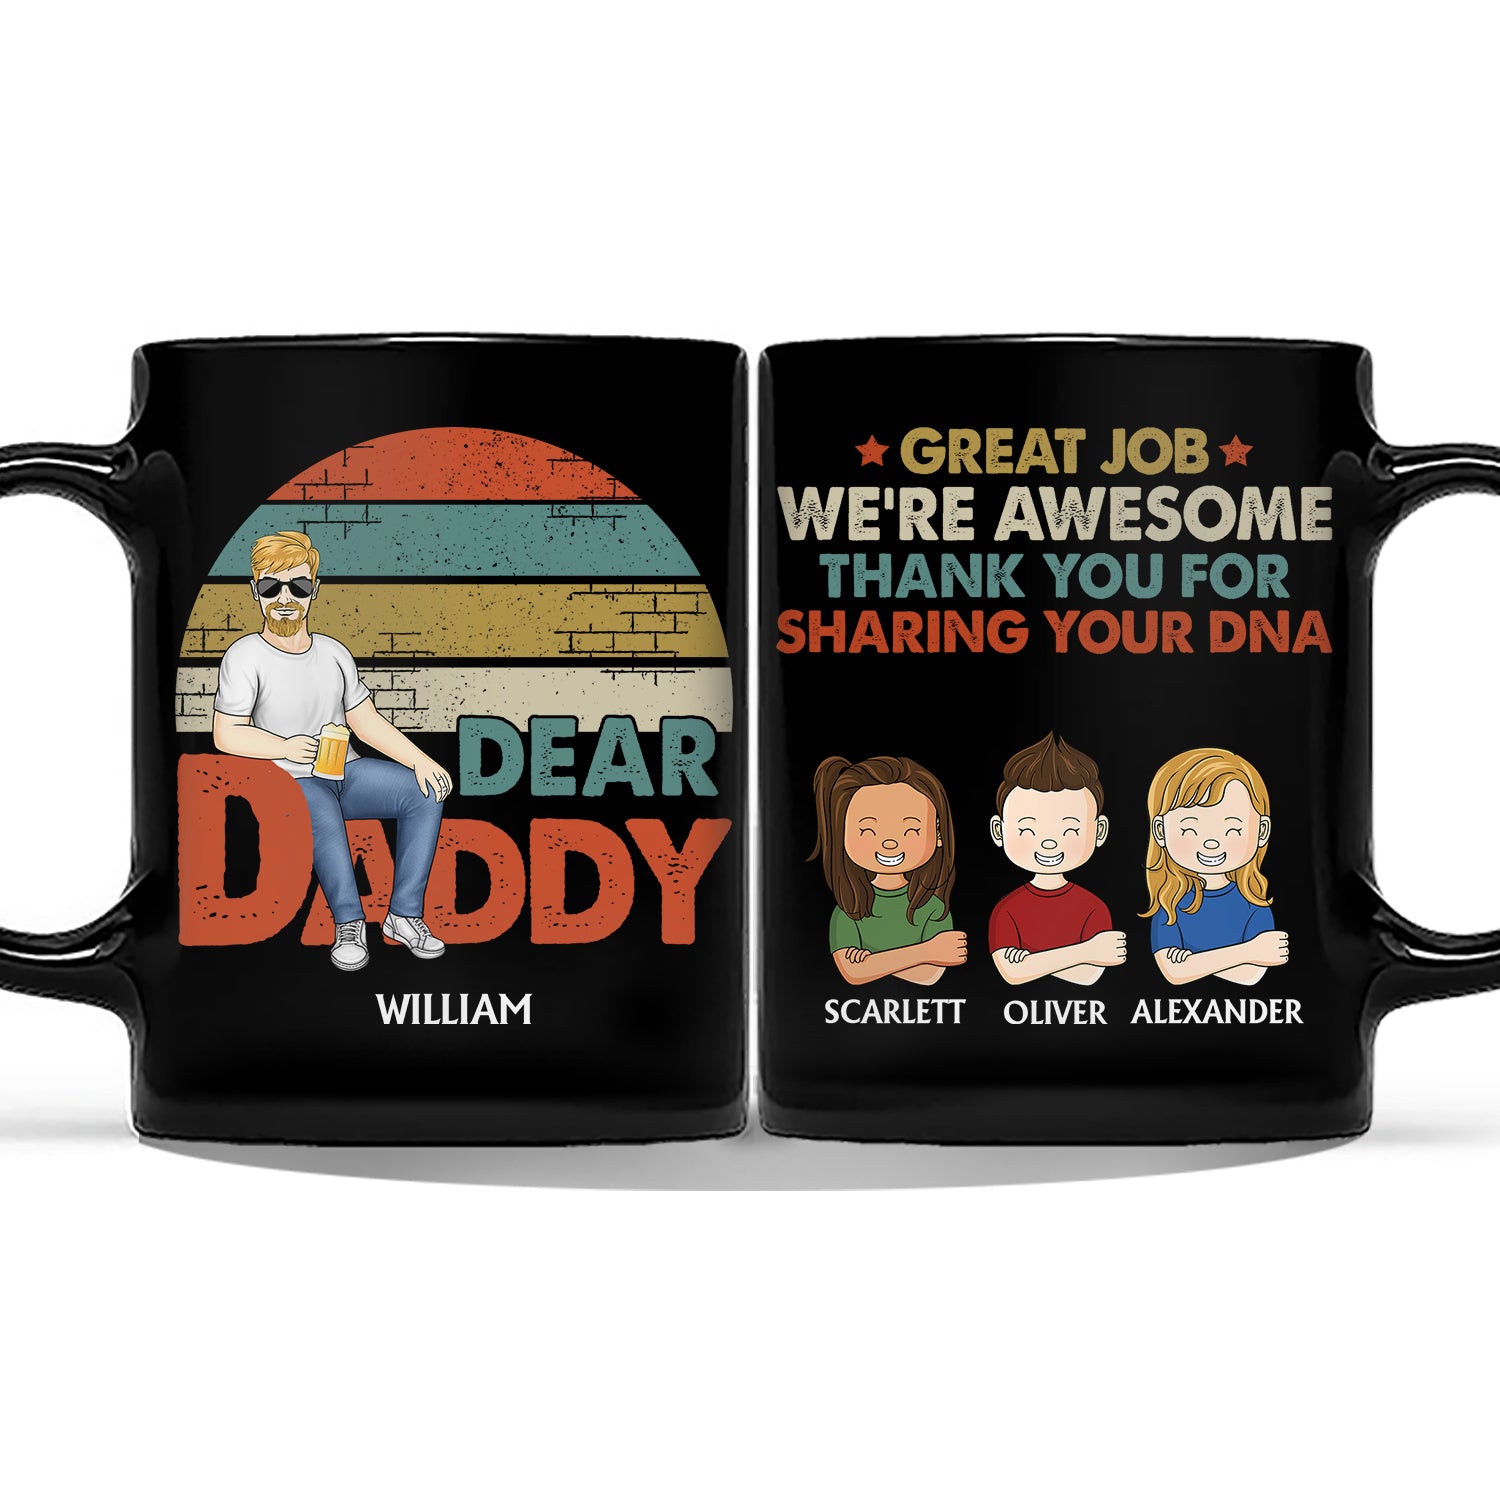 Dear Dad Thank You For Sharing Your DNA - Birthday Gift For Father, Grandpa - Personalized Custom Black Mug